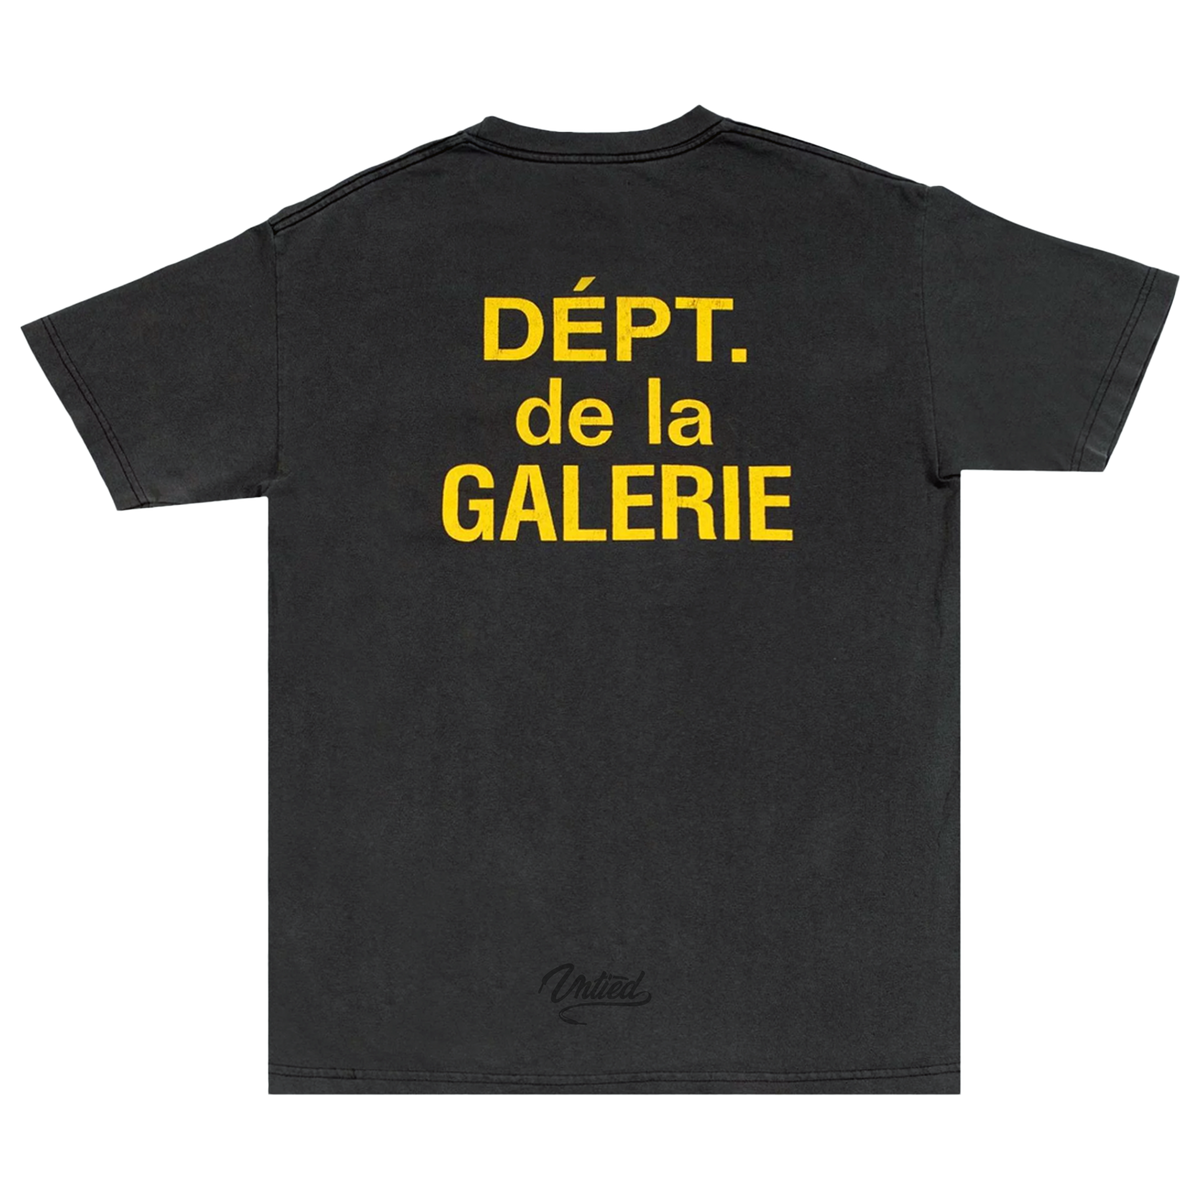 Gallery Dept. French Tee "Black"